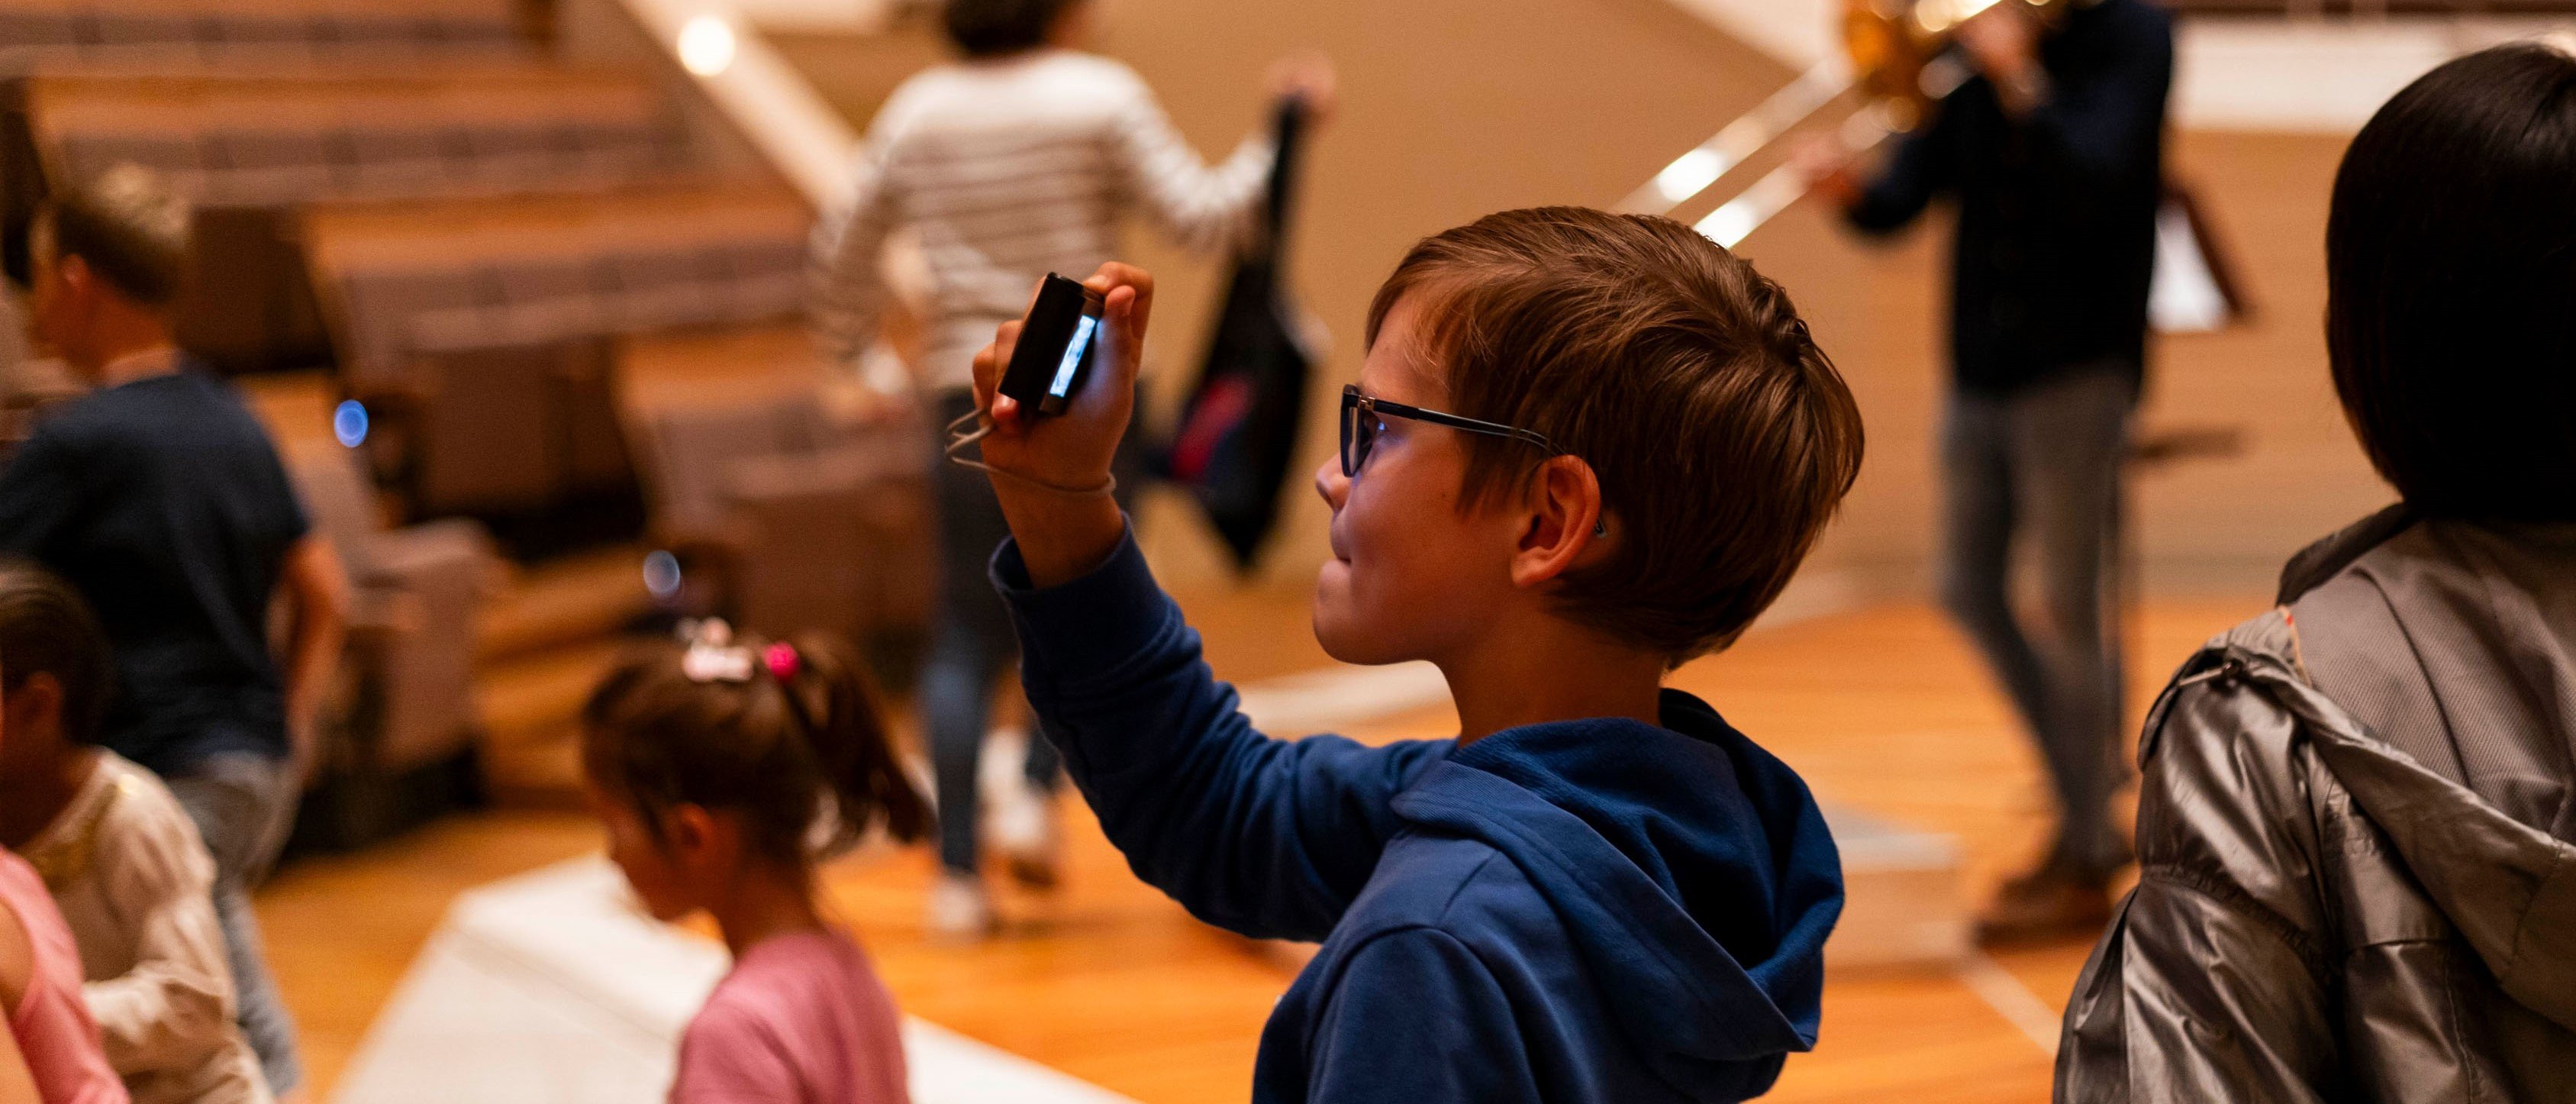 Boy takes a photo with his mobile phone in the Philharmonie.